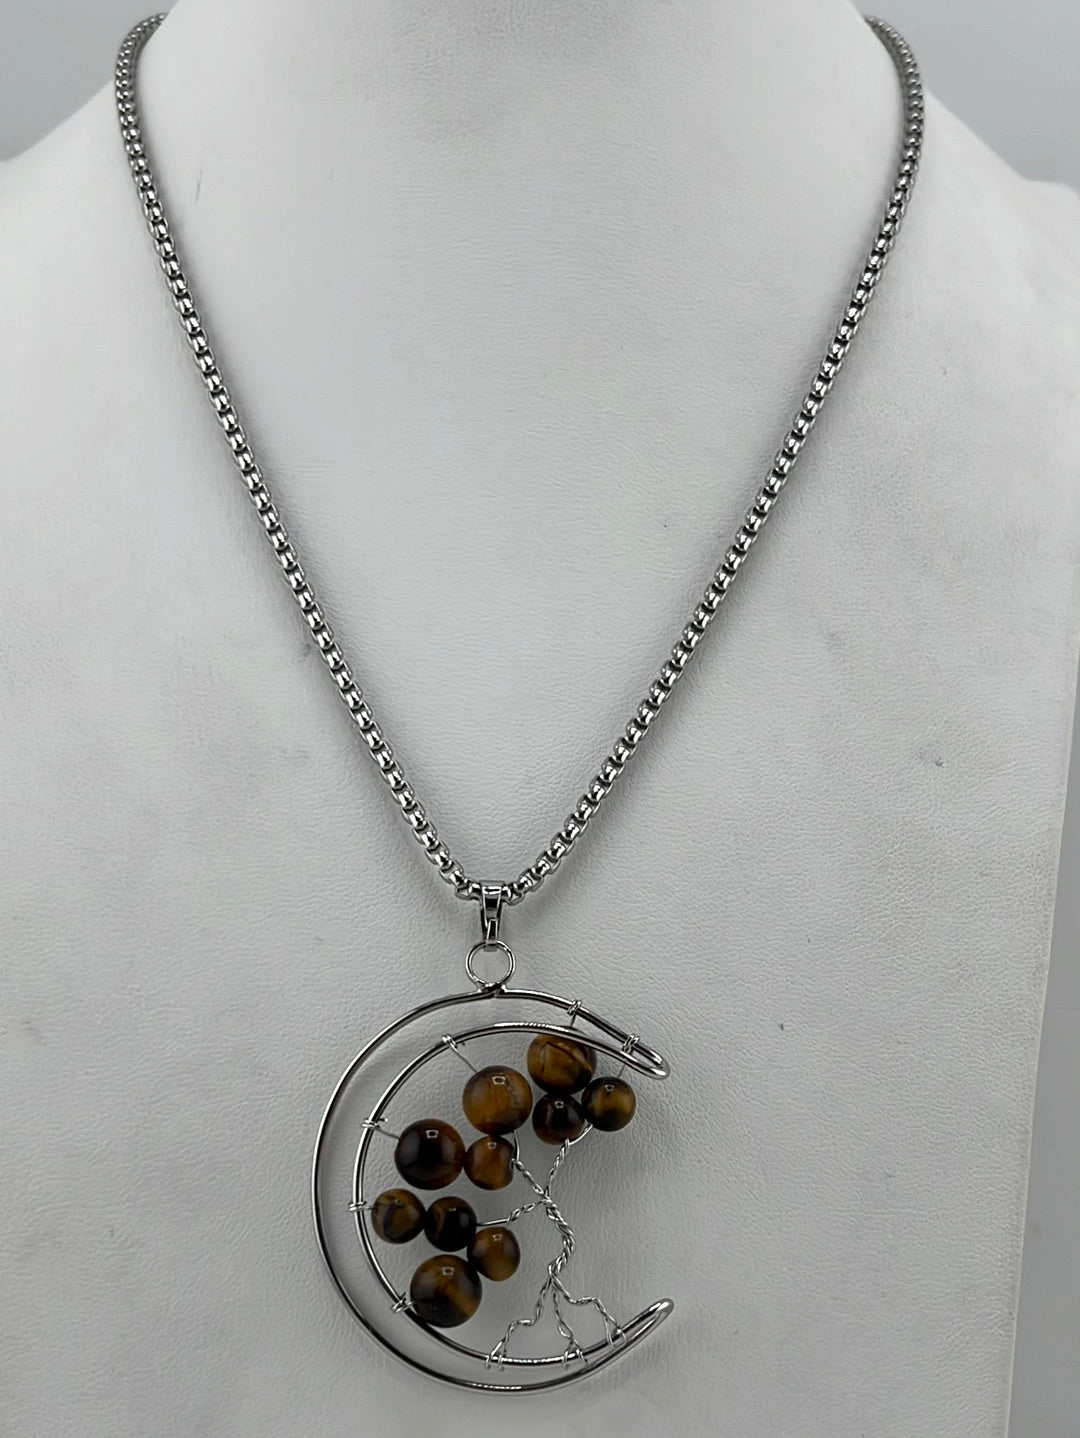 Special Value Item-Tiger Eye Tree of Life Moon Necklaces